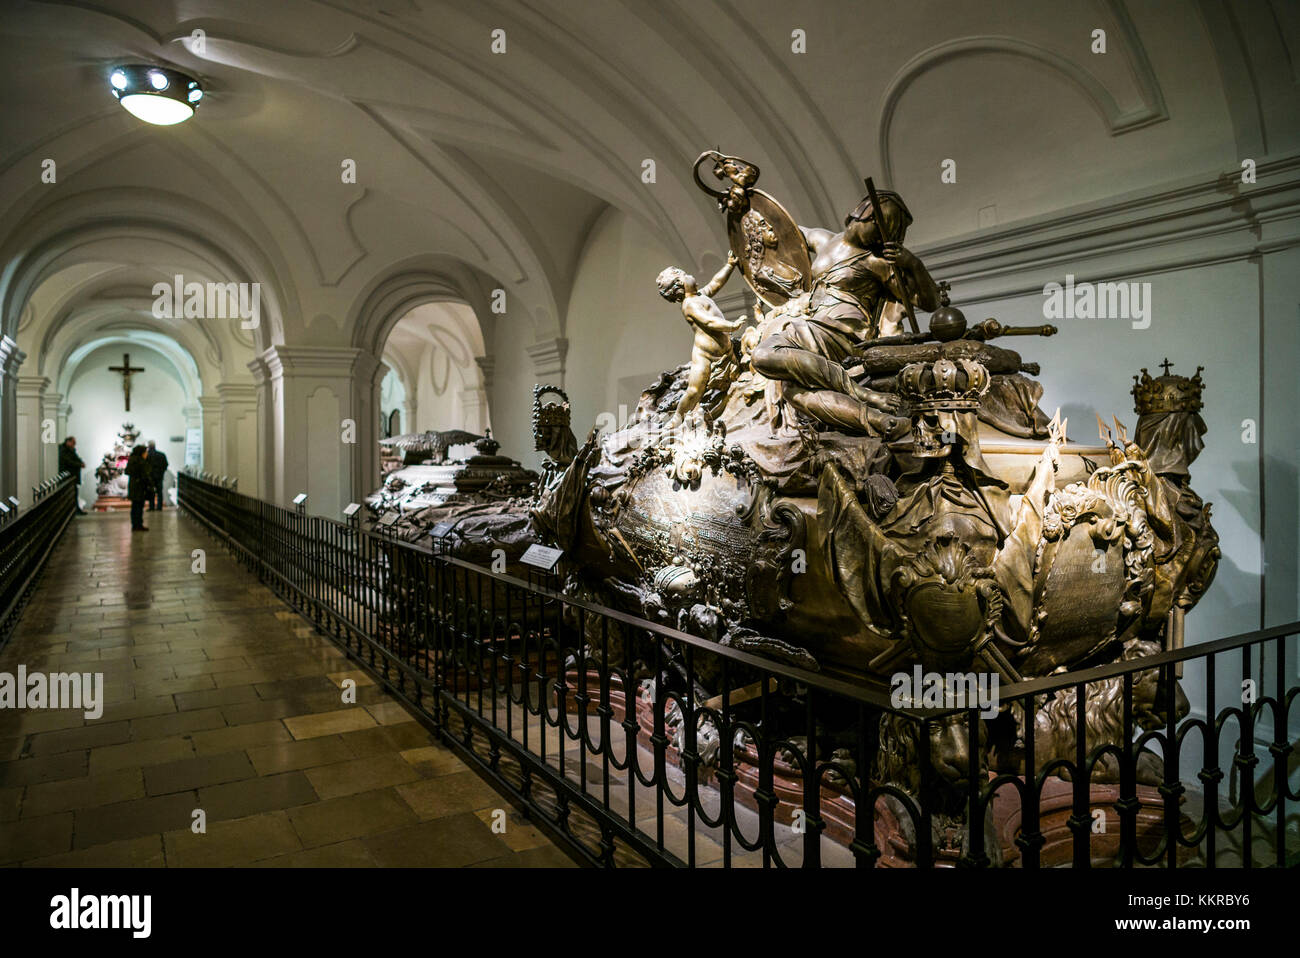 Austria, Vienna, Kaisergruft, Imperial Burial Vault, resting place of the Hapsburg Royal Family, crypt of King Karl Vi Stock Photo